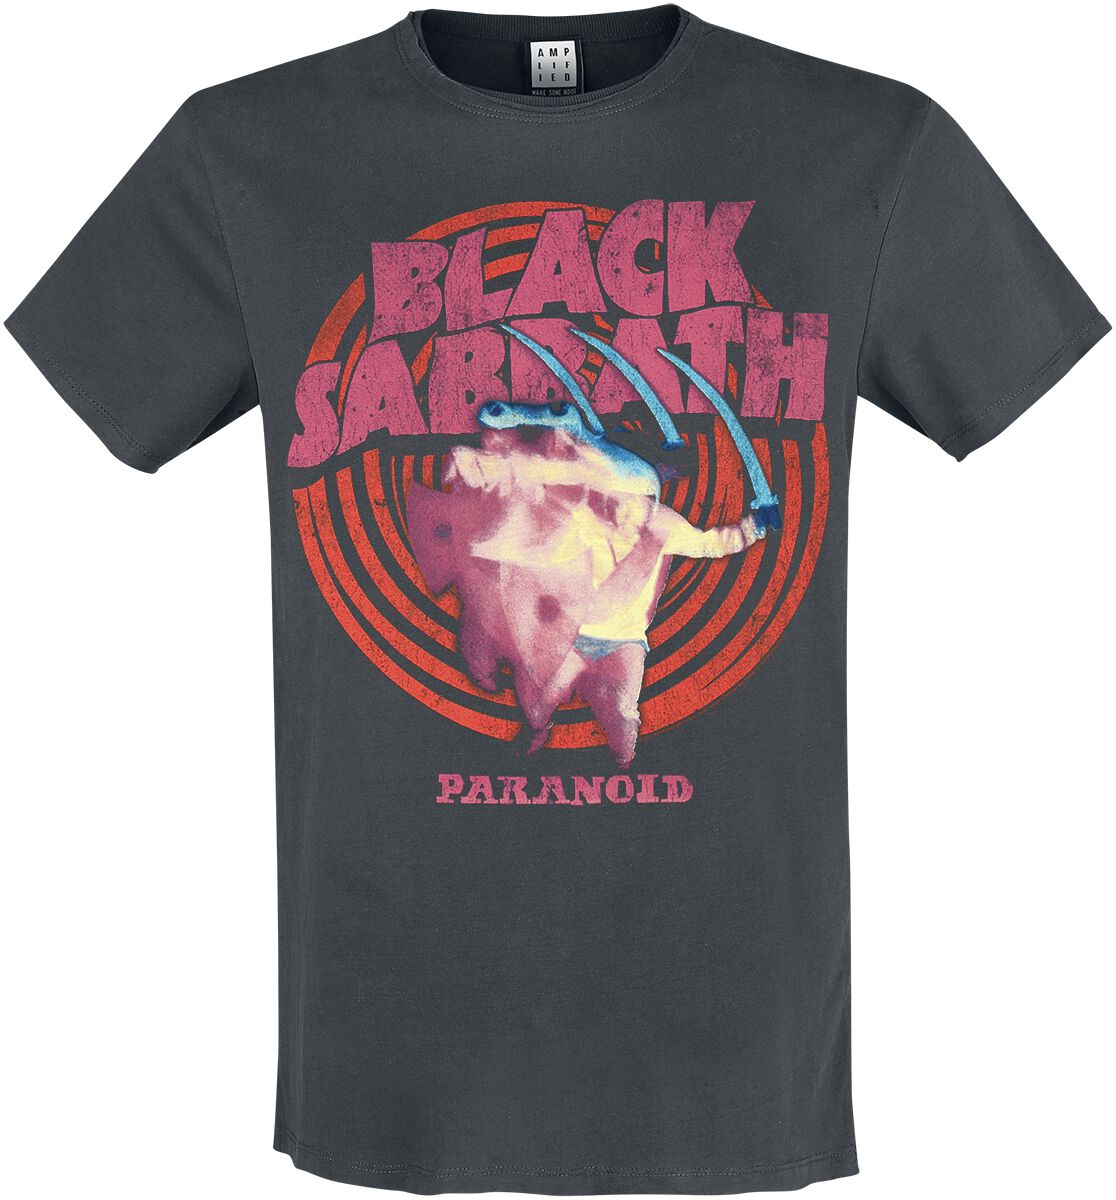 Black Sabbath Amplified Collection - Paranoid T-Shirt charcoal in XL